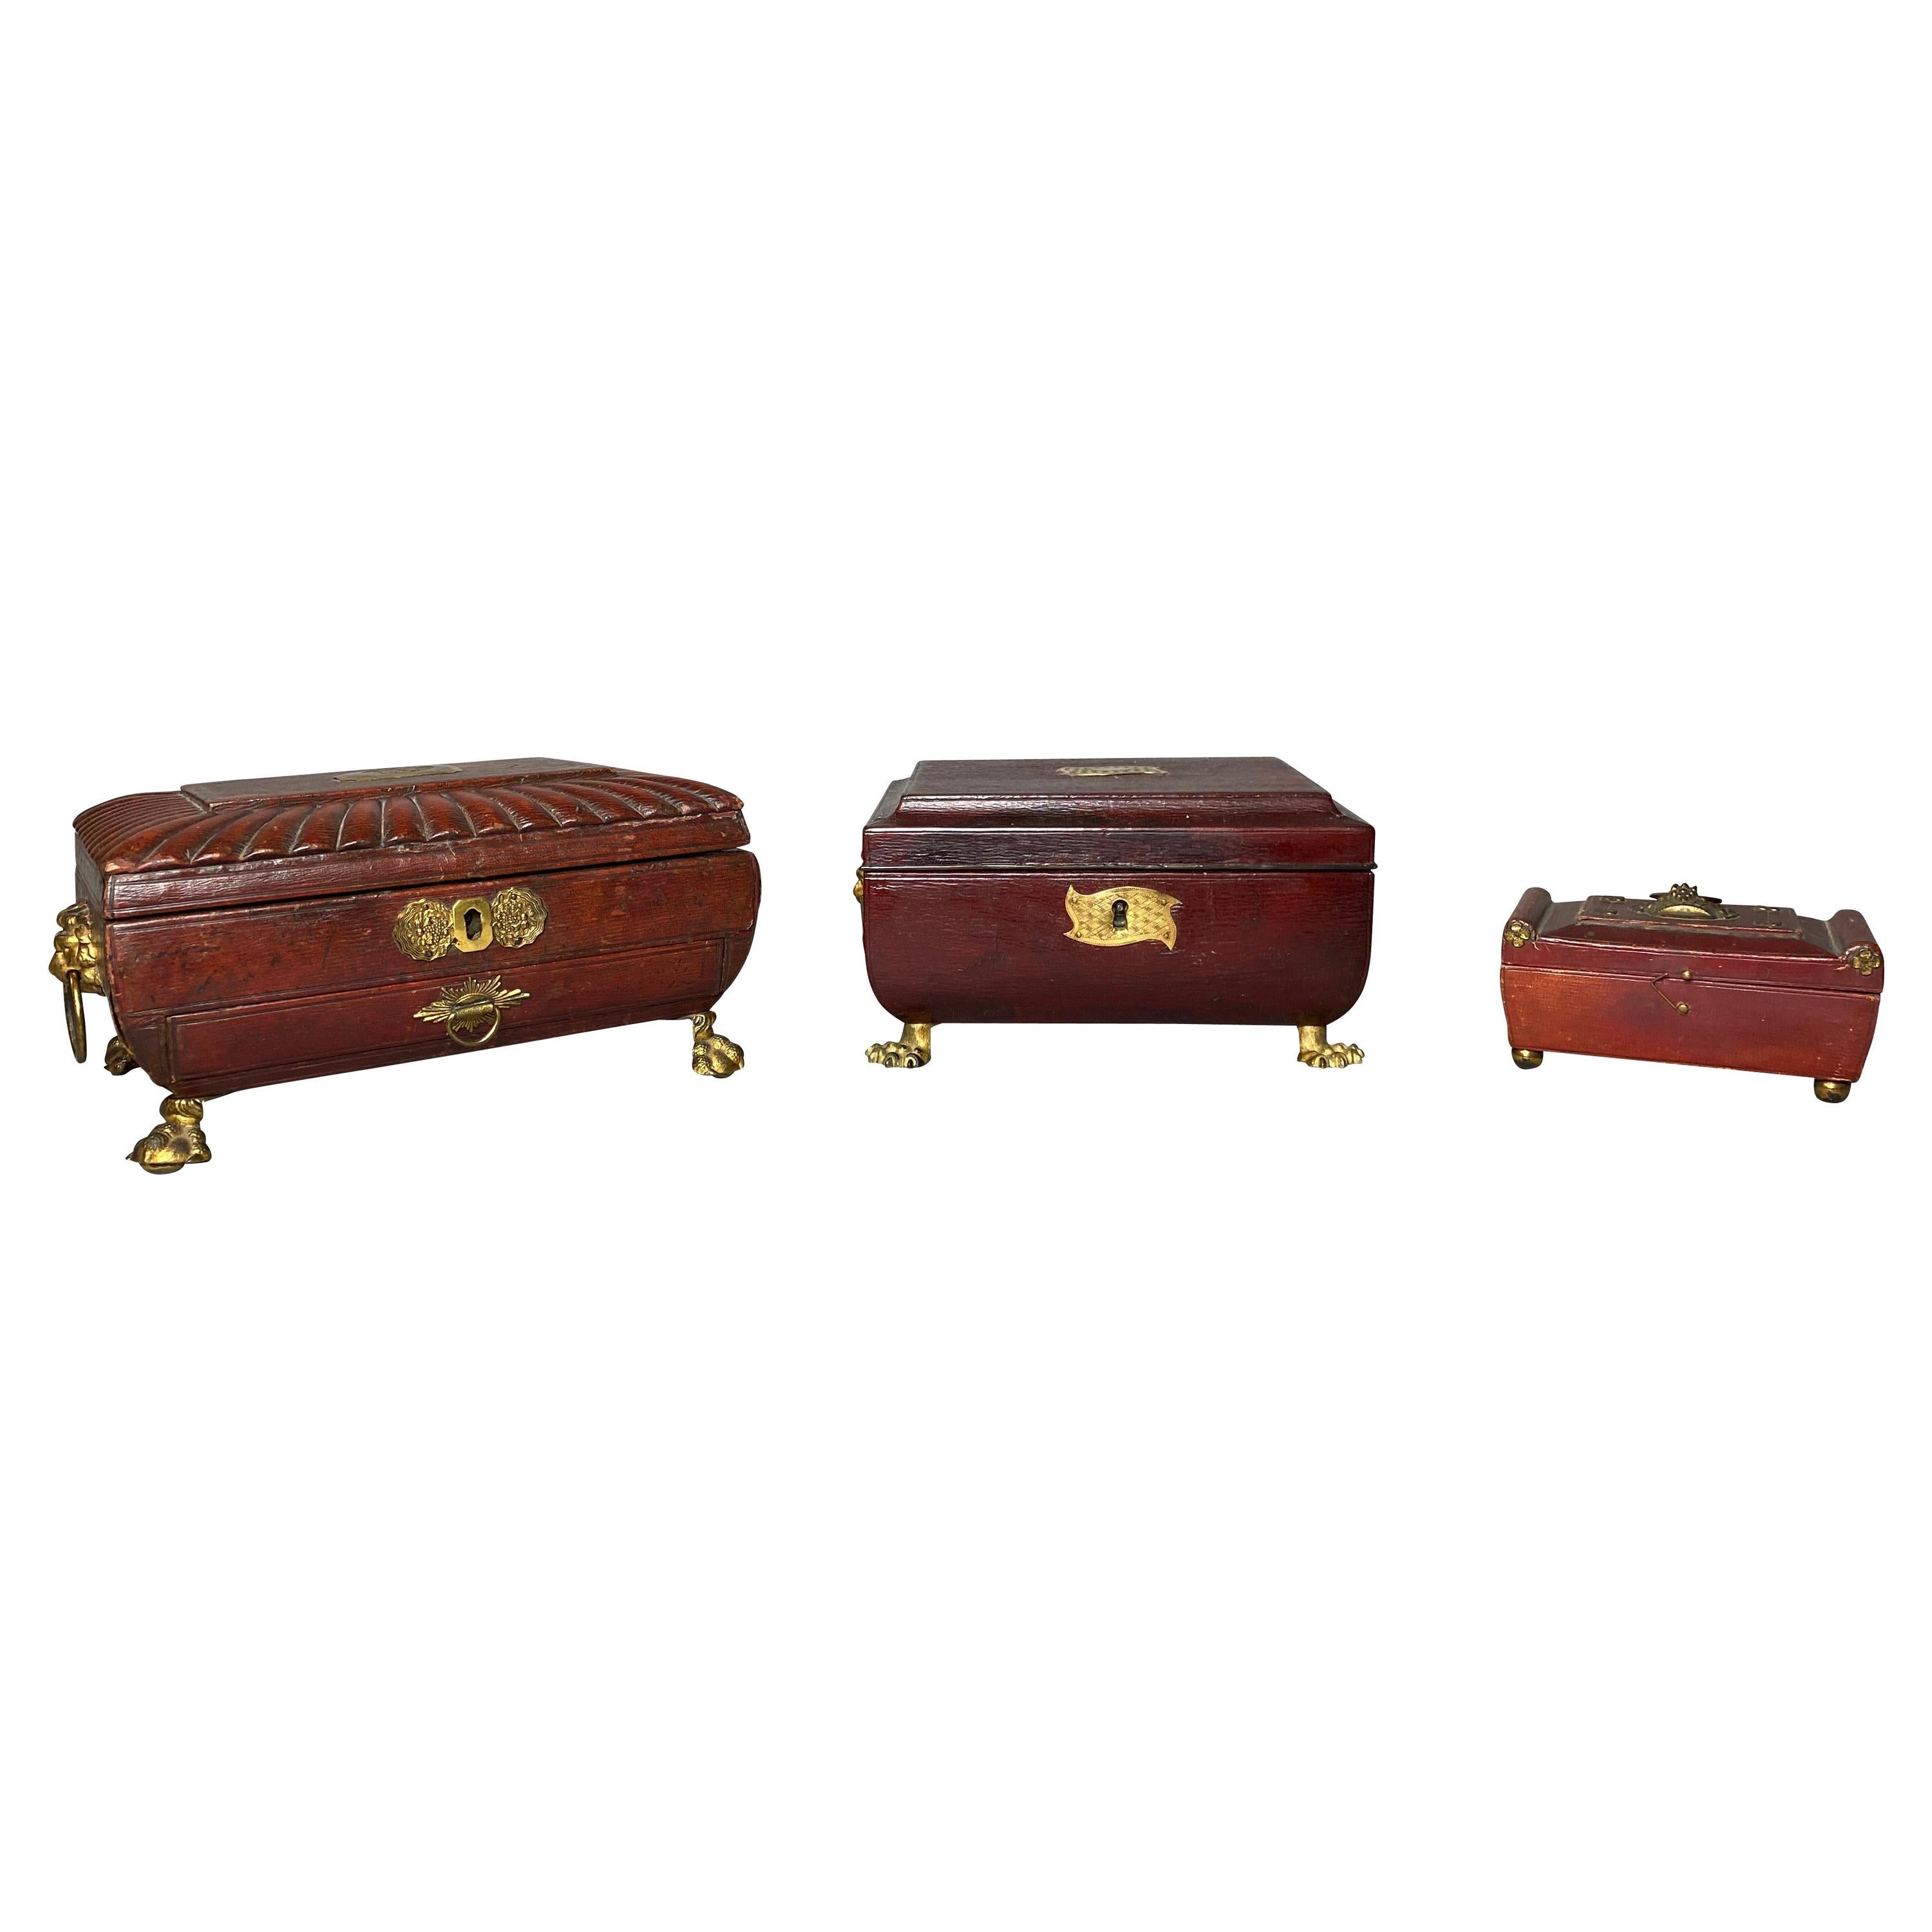 Three Regency Red Leather Boxes